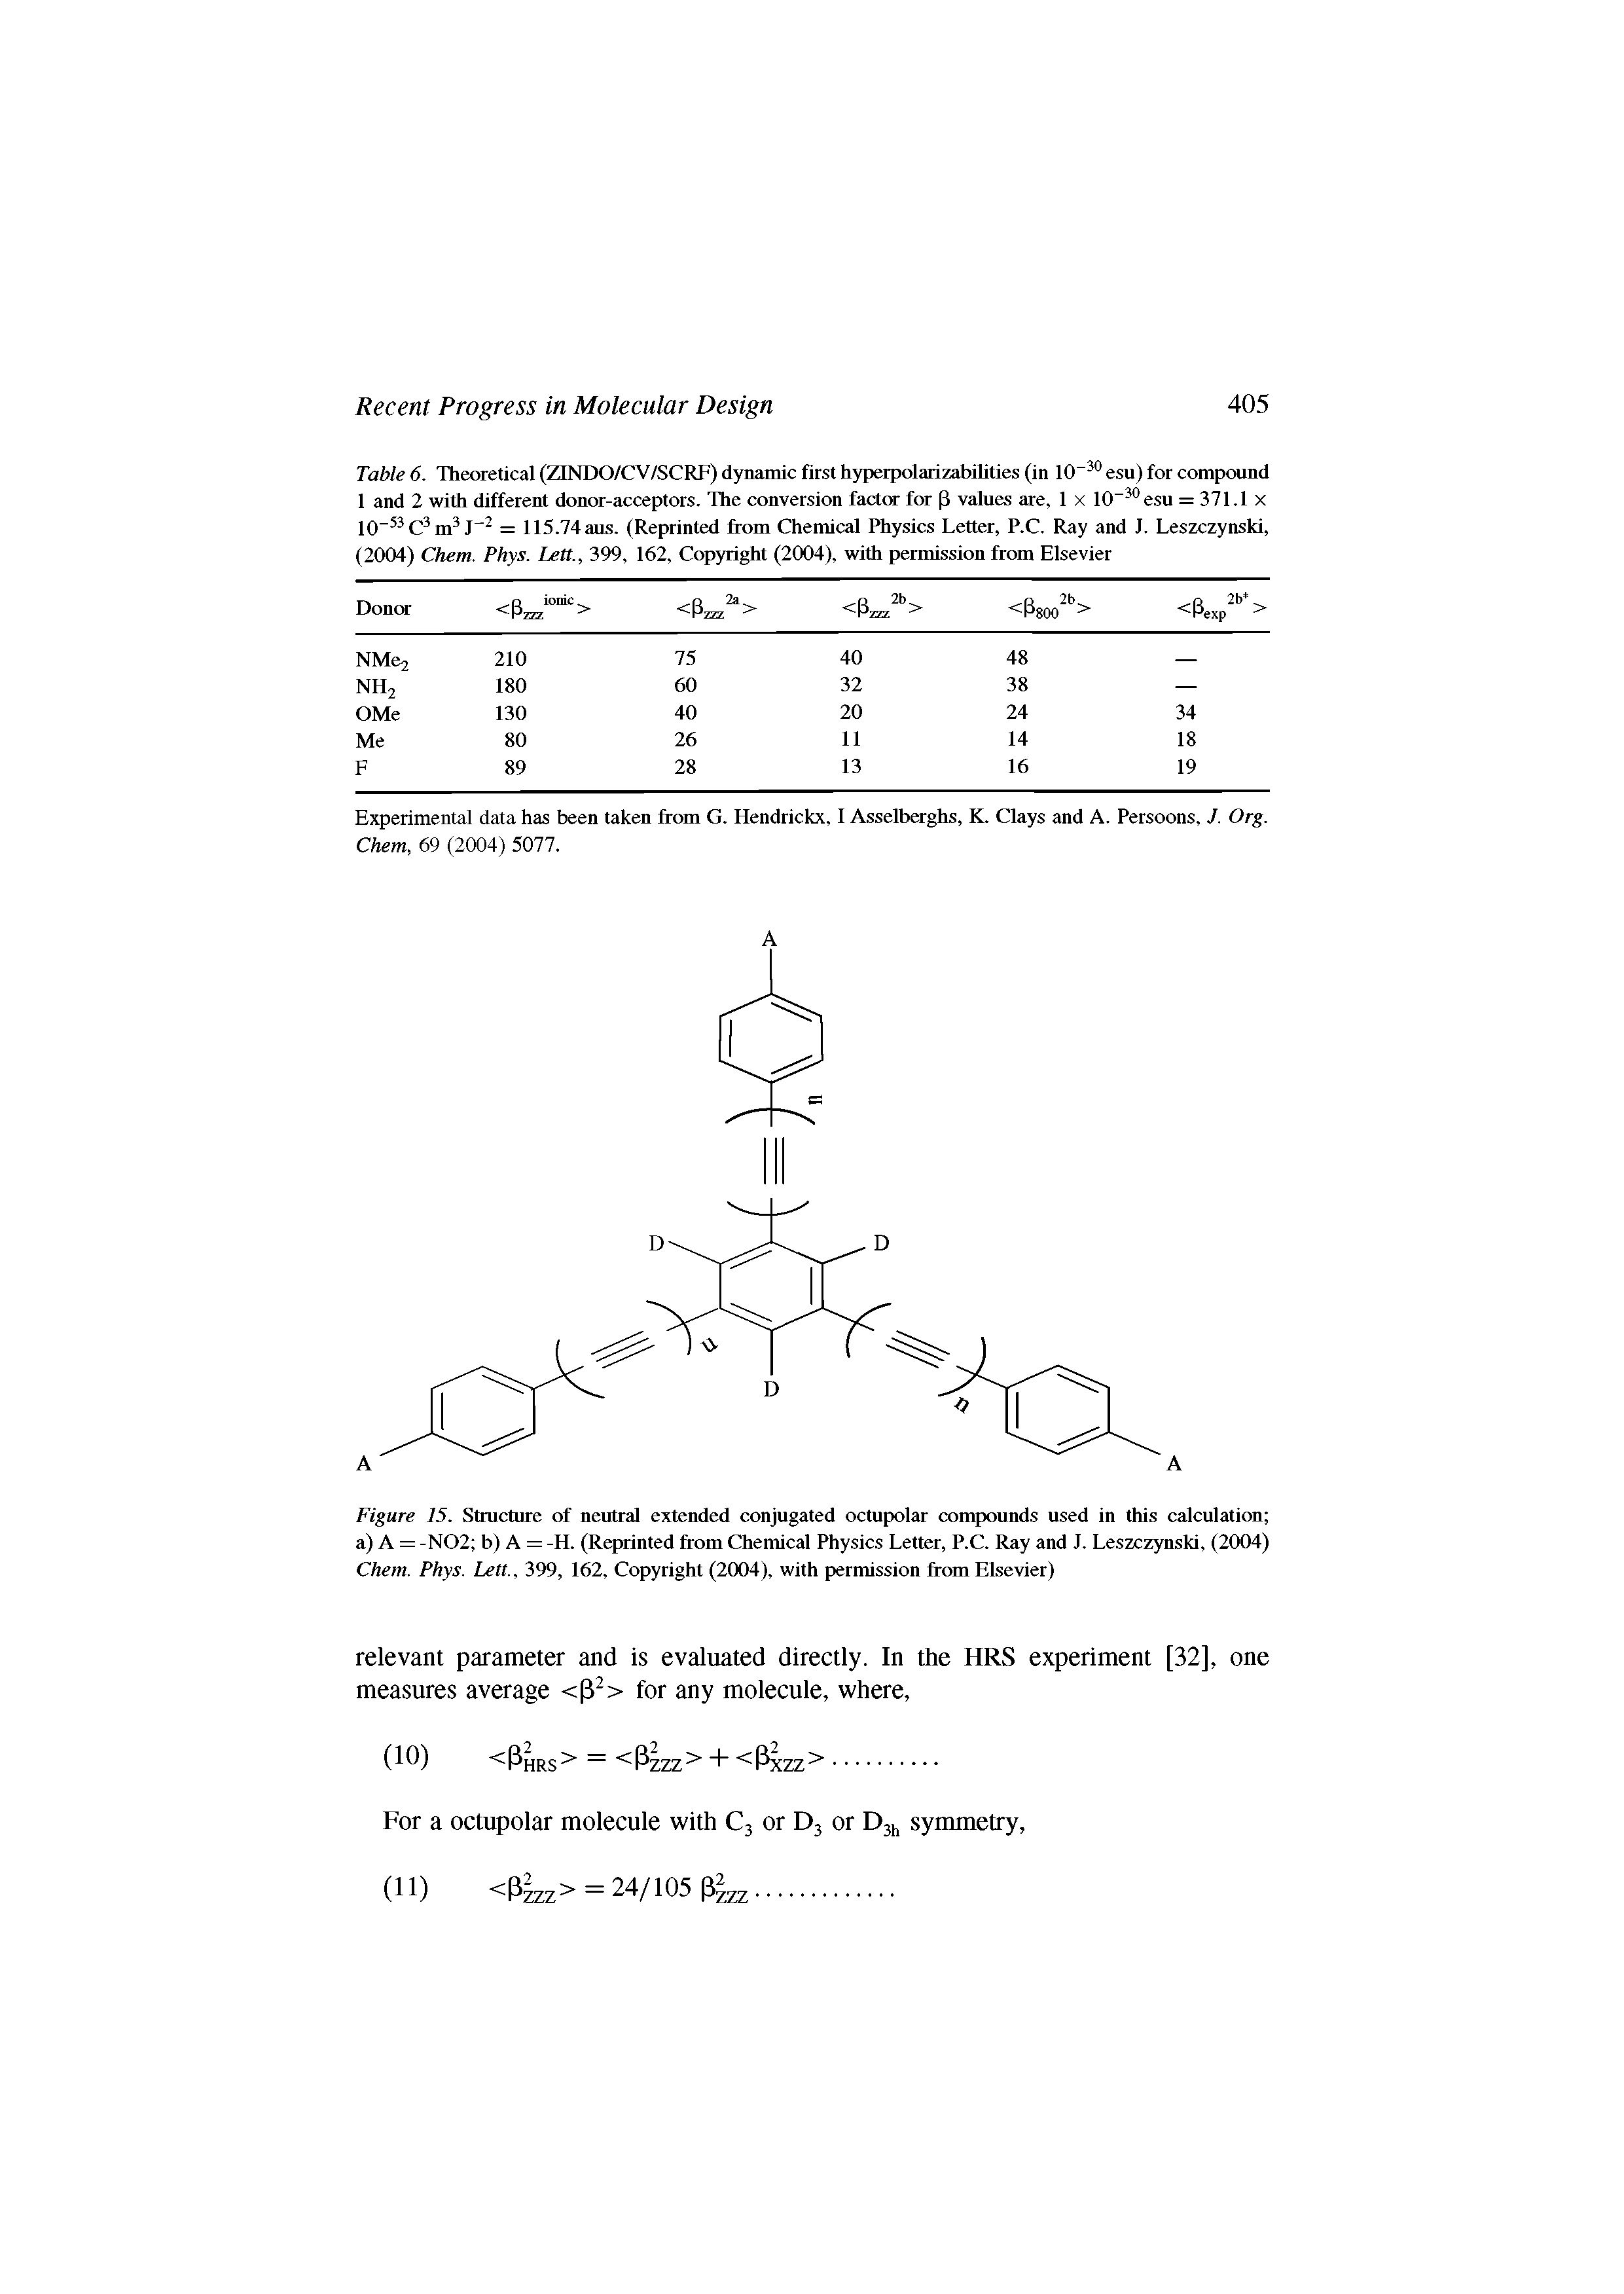 Figure 15. Structure of neutral extended conjugated octupolar compounds used in this calculation a) A = -NO2 b) A = -H. (Reprinted from Chemical Physics Letter, P.C. Ray and J. Leszczynski, (2004) Chem. Phys. Lett.. 399, 162, Copyright (2004), with permission from Elsevier)...